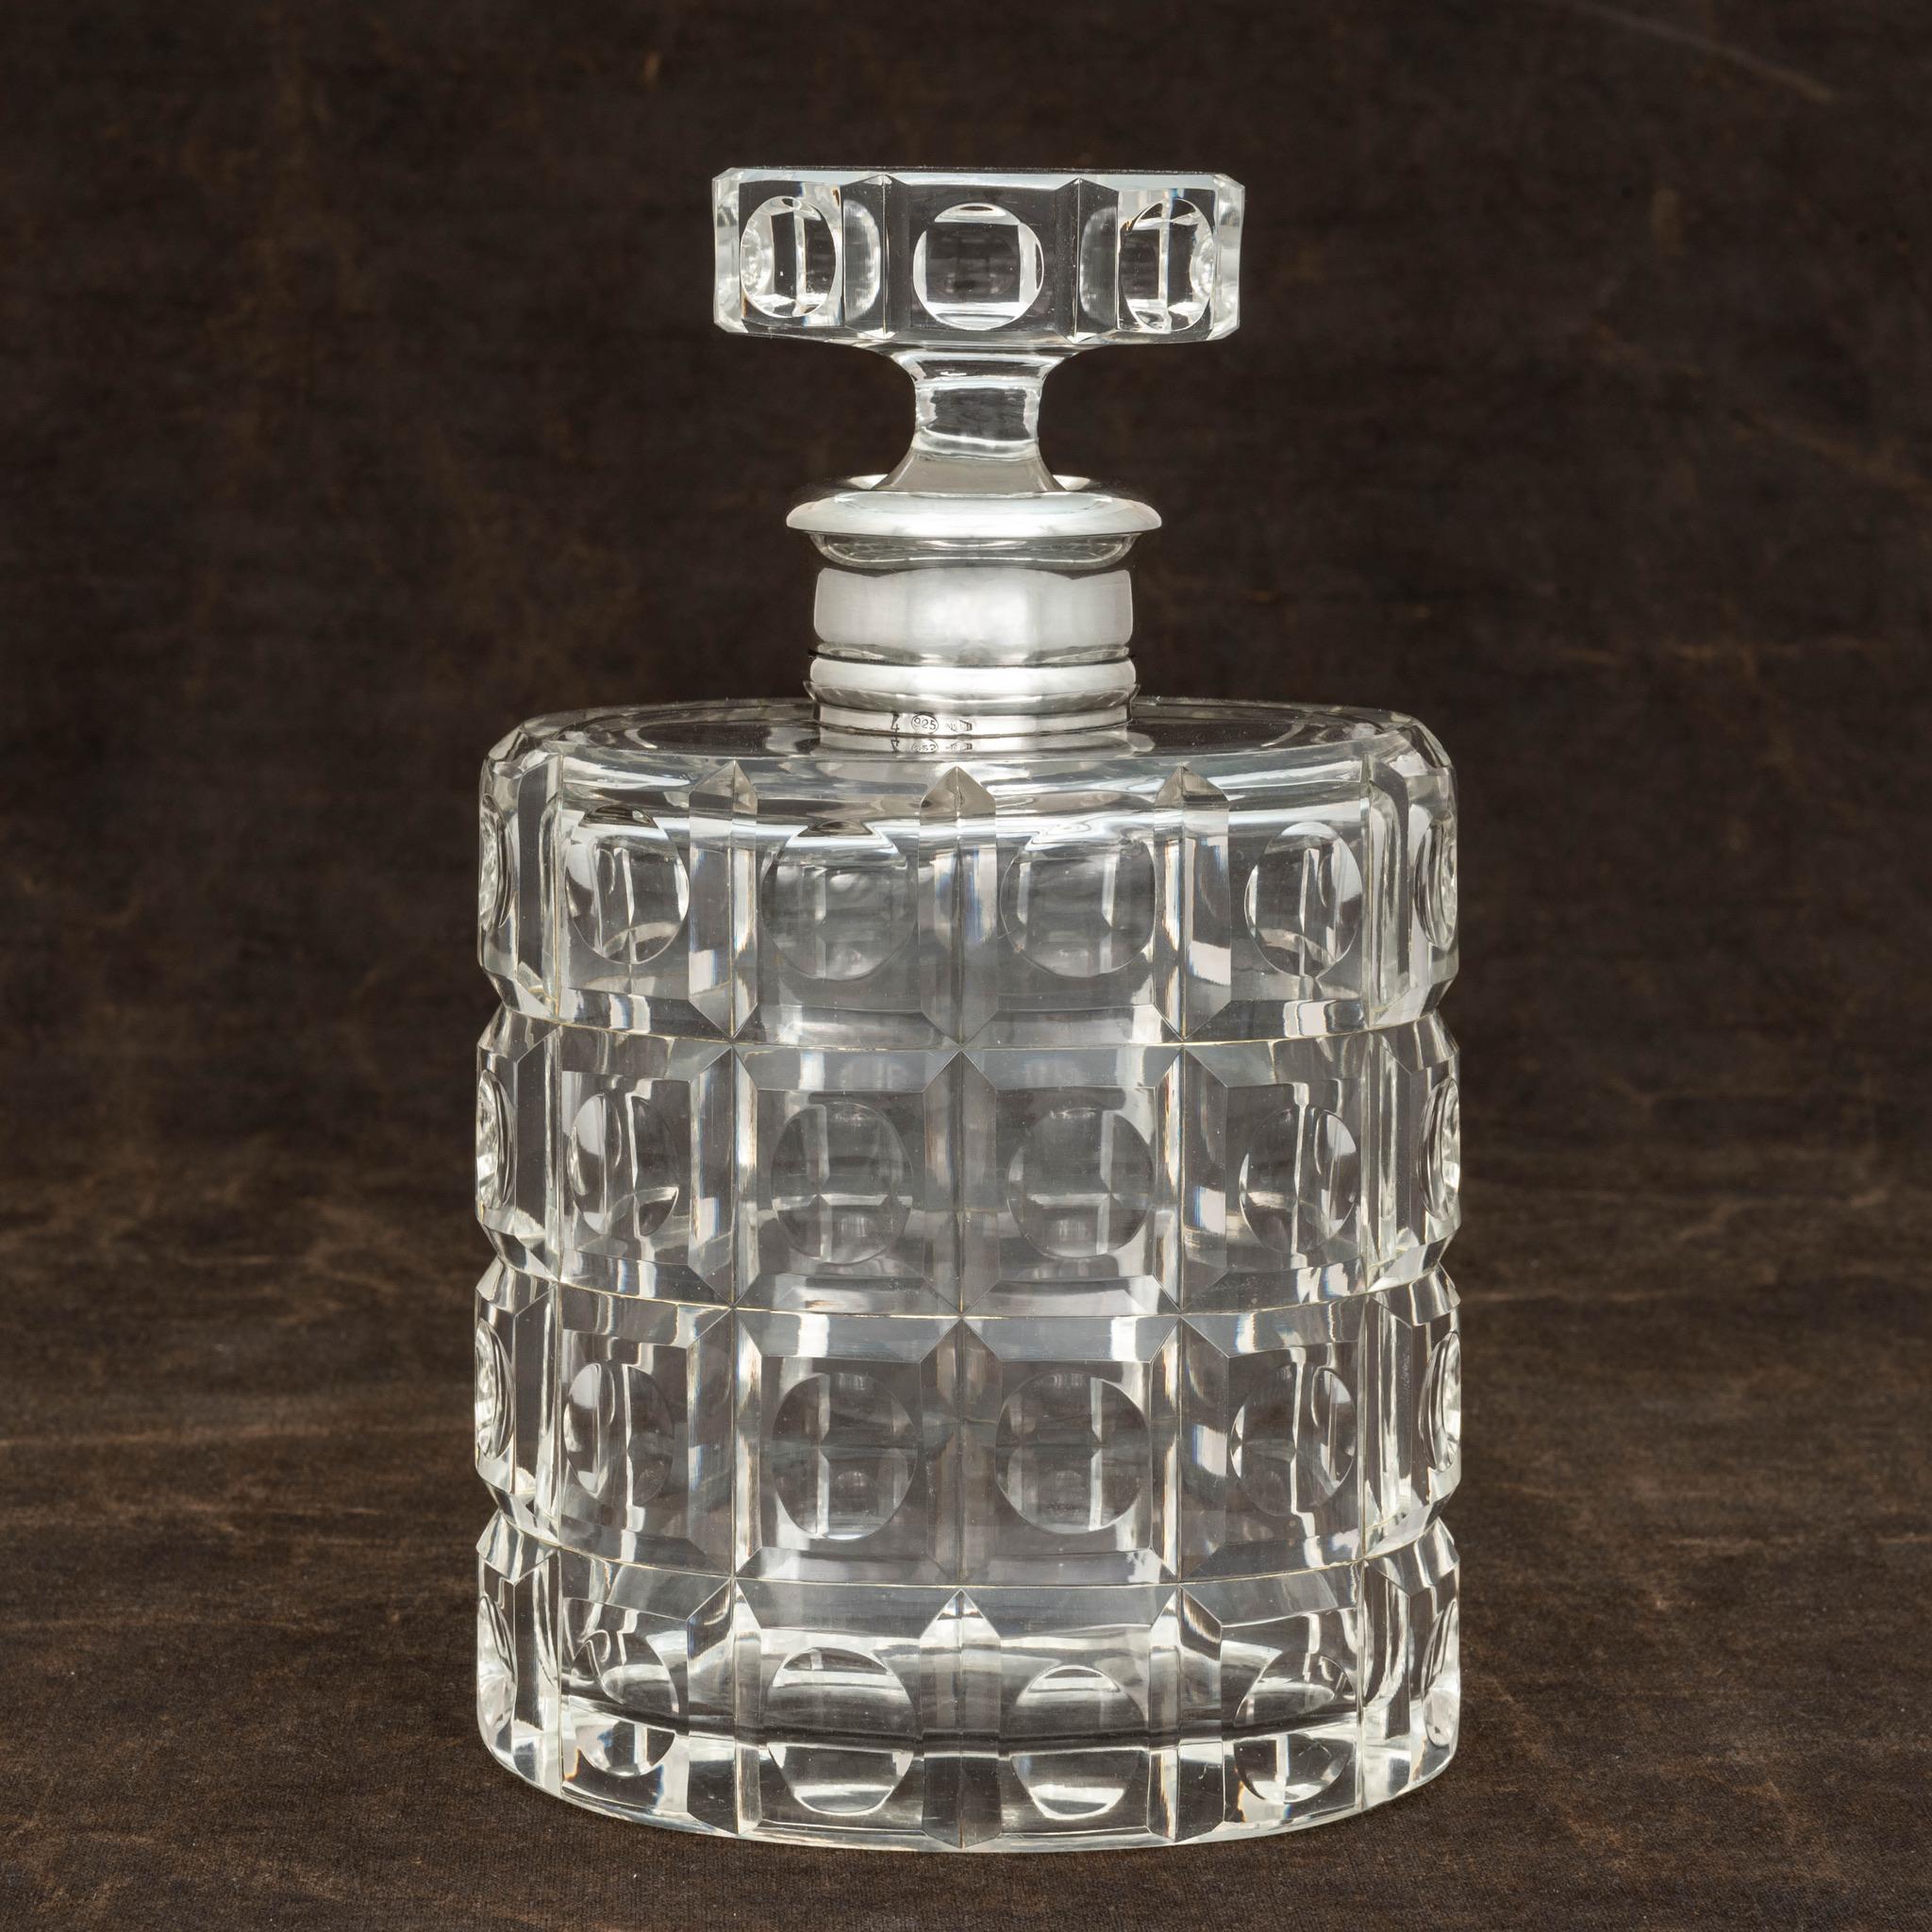 Cut glass geometric pattern decanter with silver collar, by Fratelli Cacchione, Milan, Italy. Stamped with the maker’s number, 39MI. Also marked with the oval silver purity mark 925 (the same purity as Sterling). Fantastic quality!.

Dimensions: